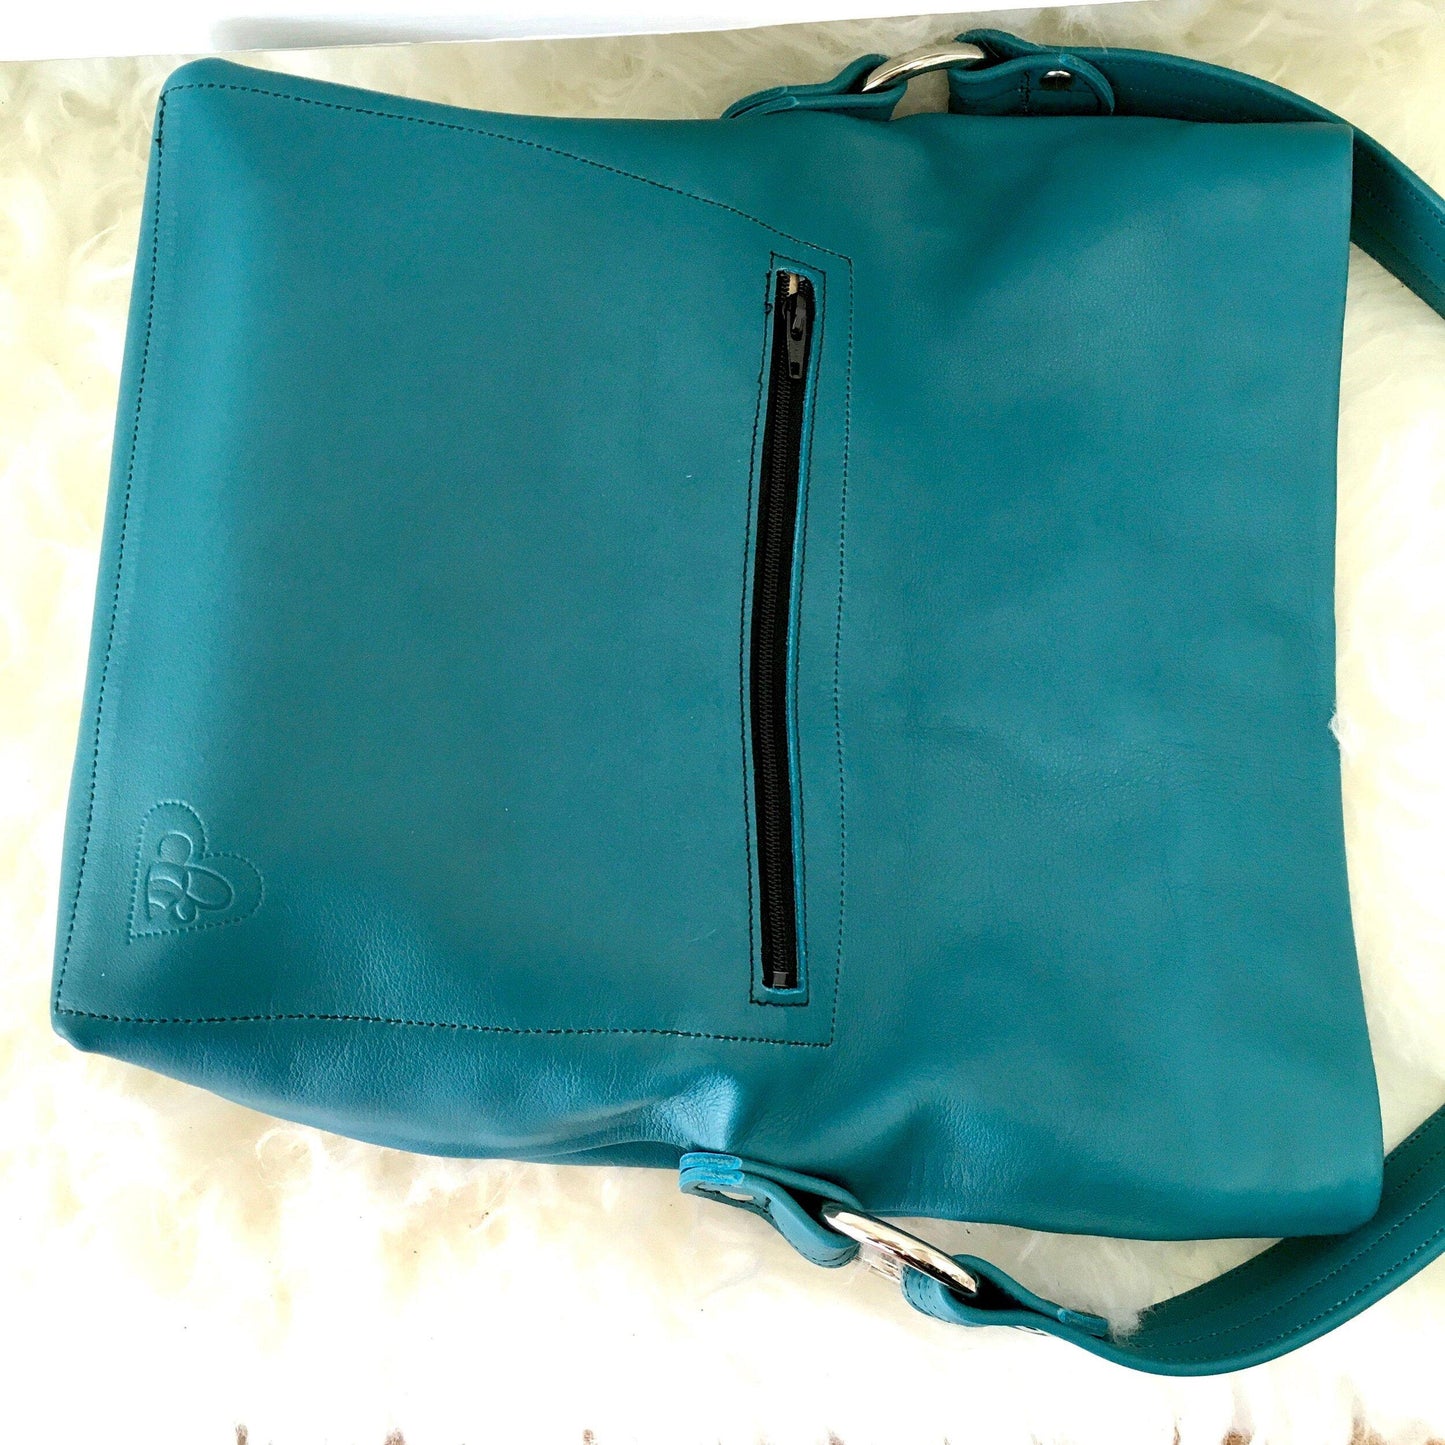 Sunny Soft Leather Handbag in Turquoise